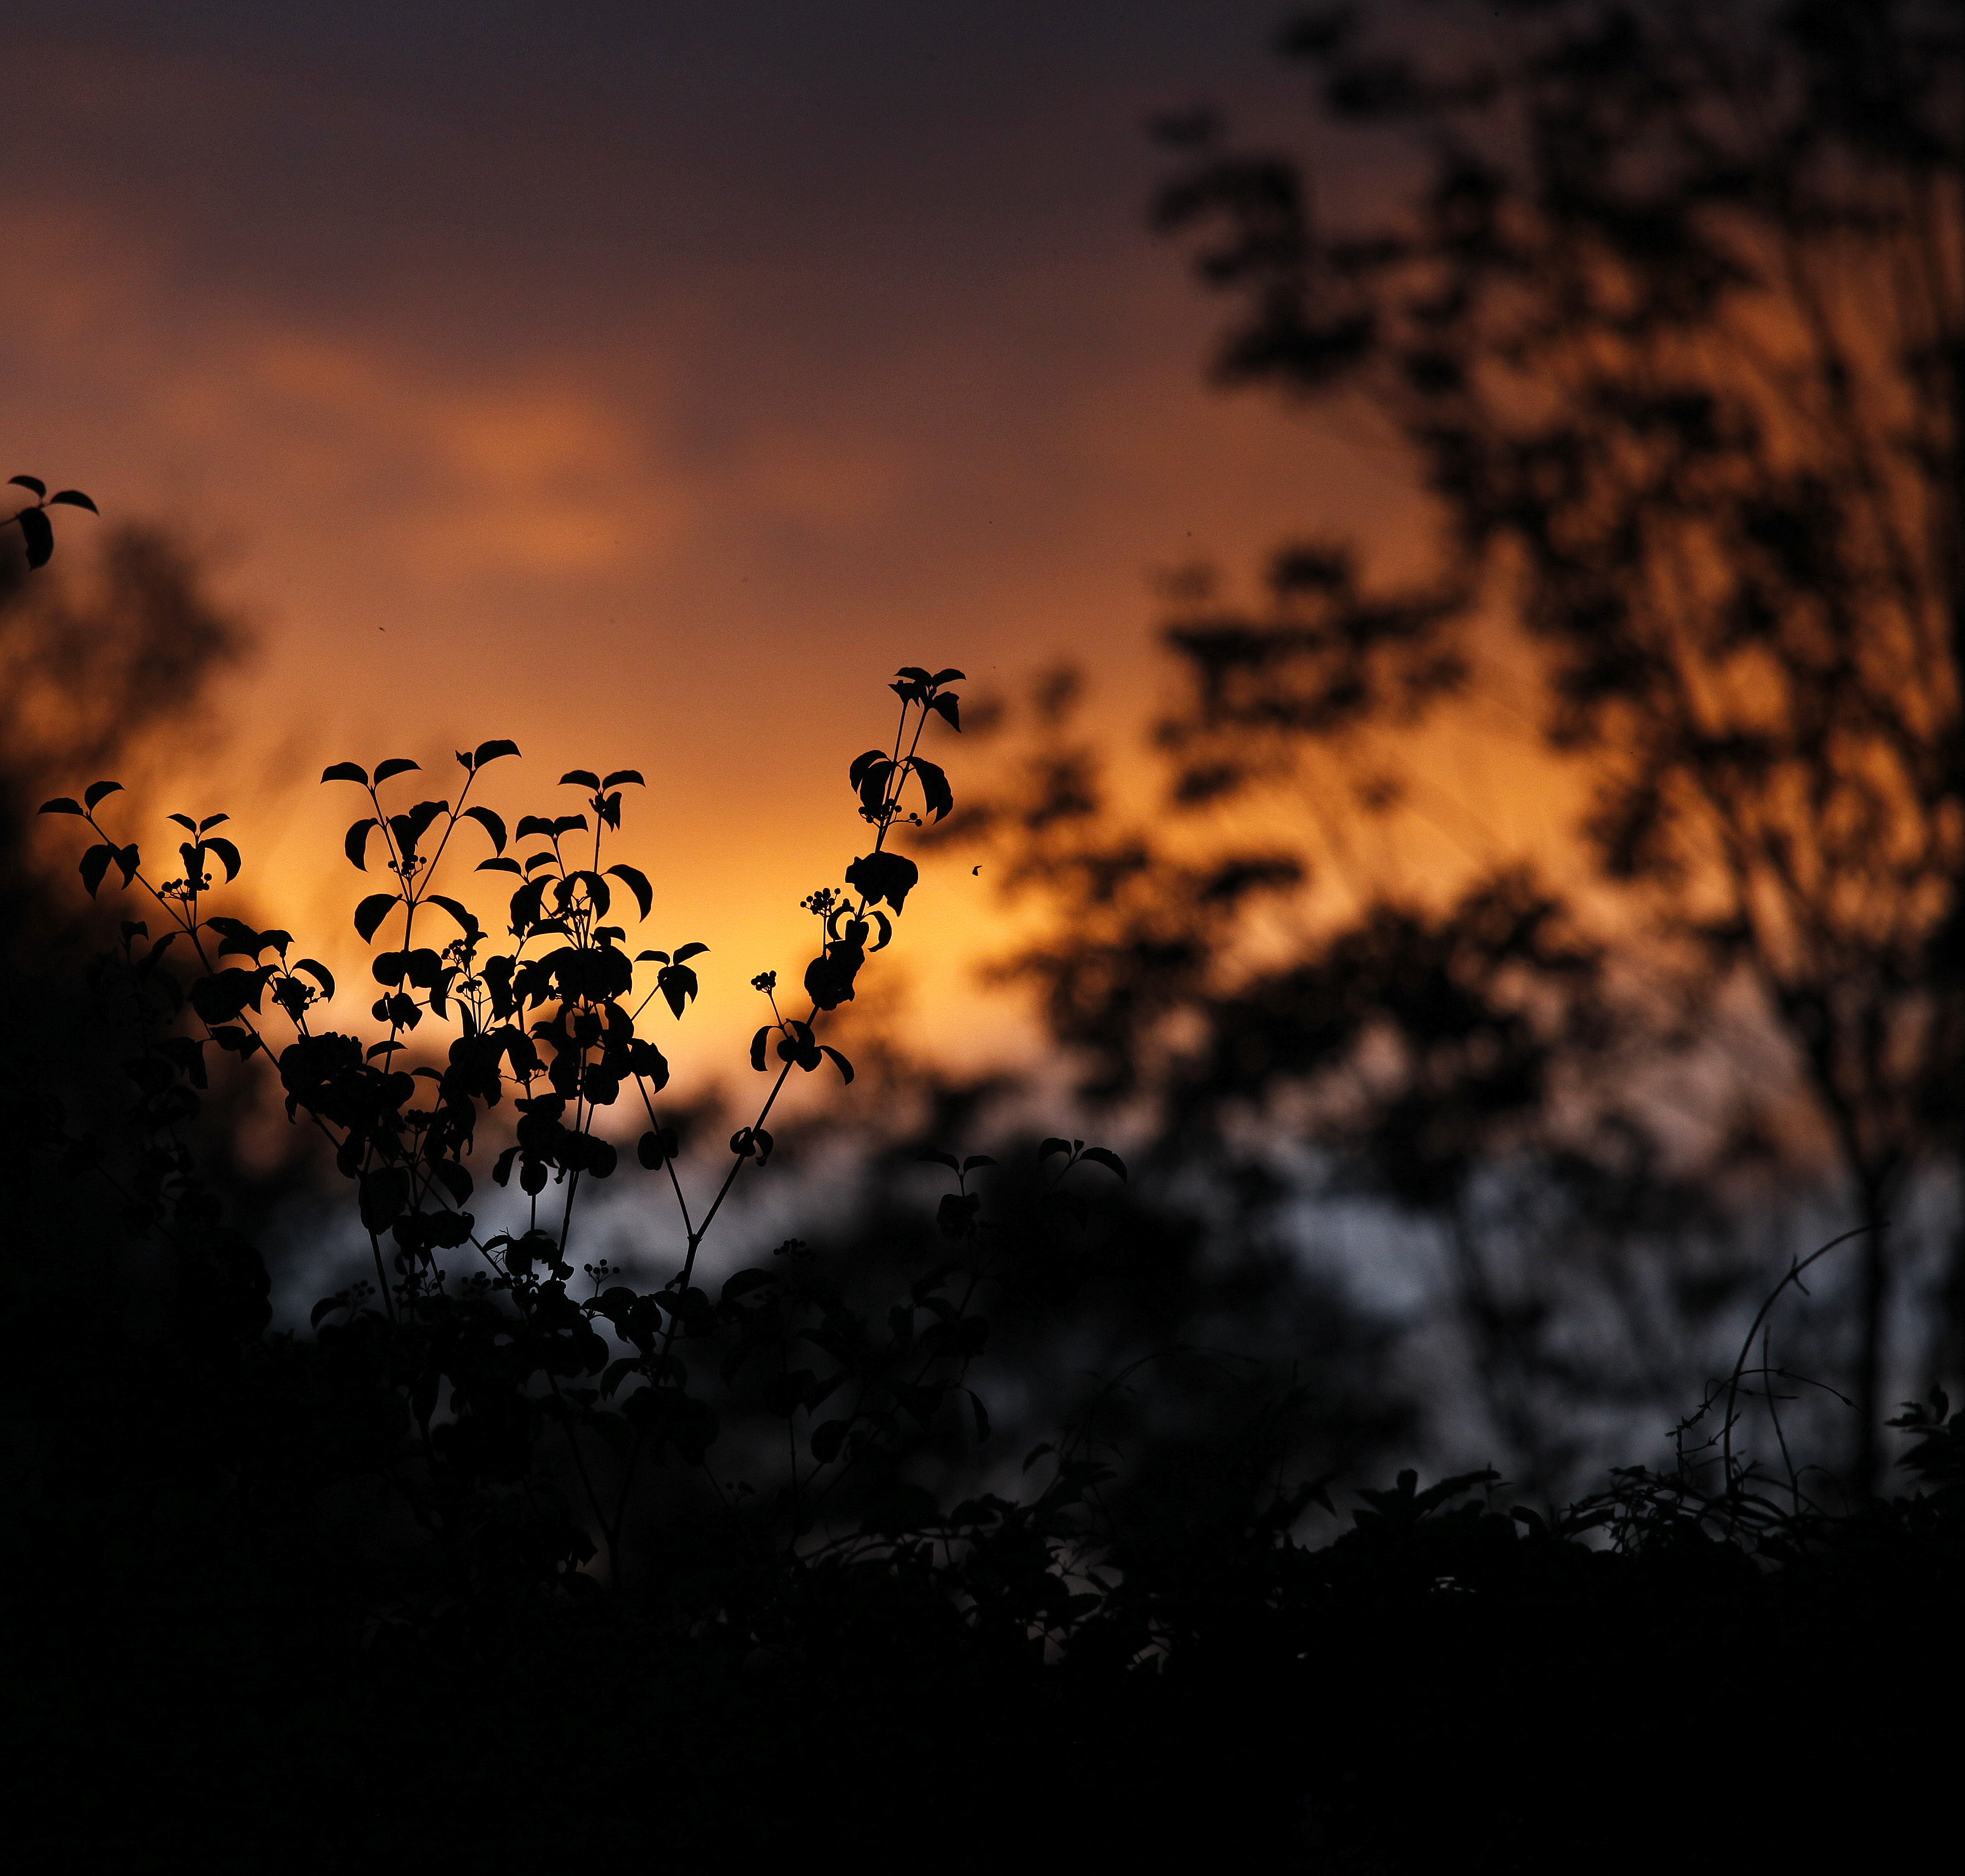 dark, sunset, silhouettes, leaves, outlines, plants iphone wallpaper